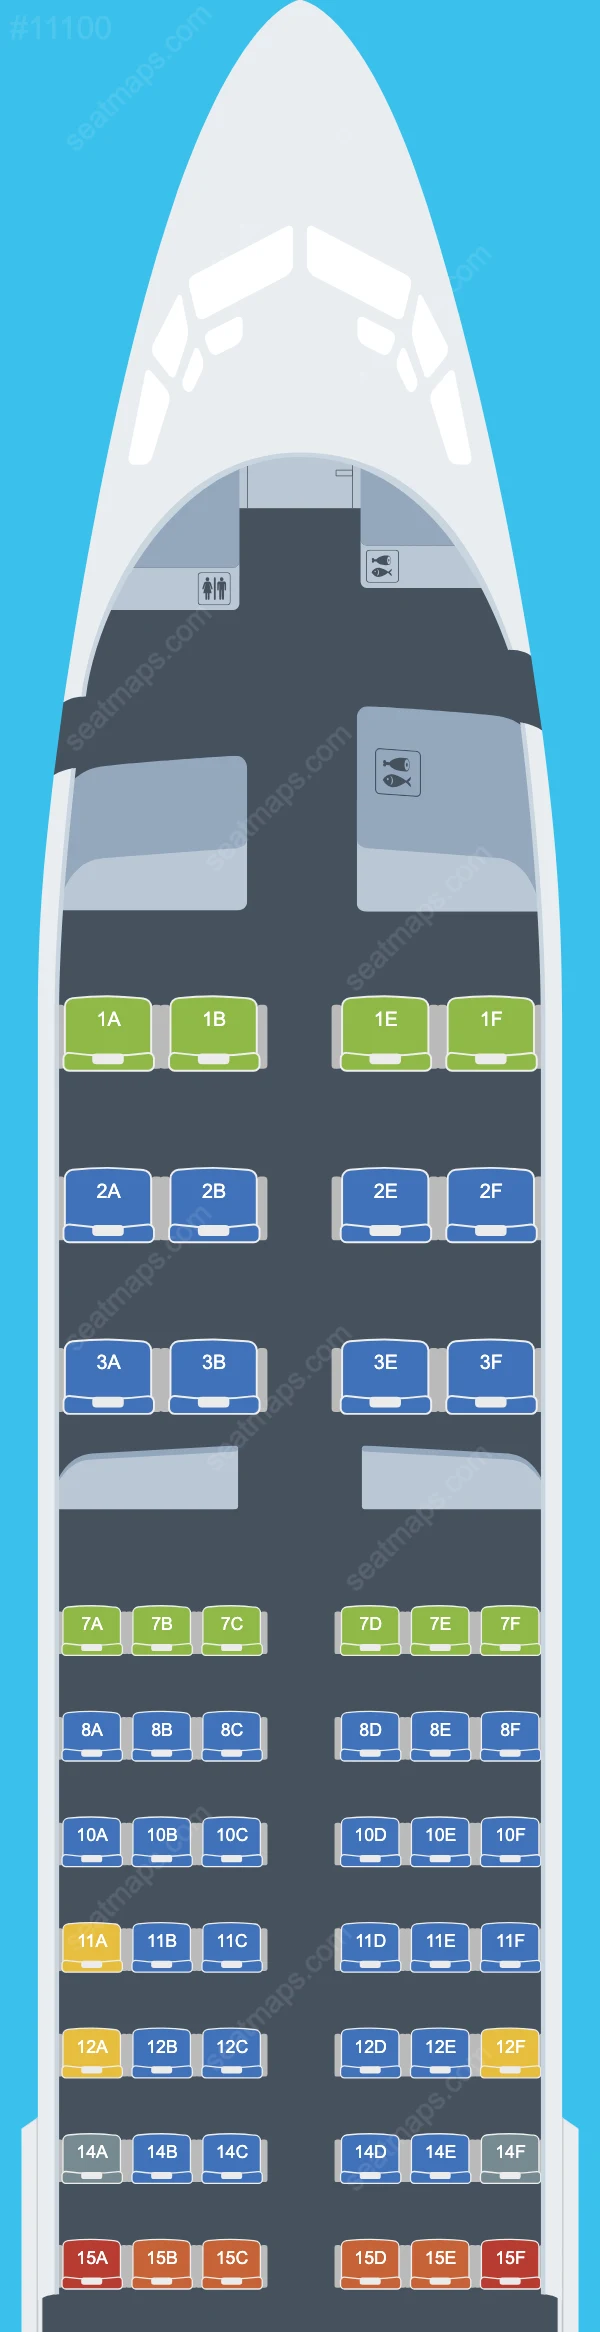 United Boeing 737-800 V.4 seatmap mobile preview